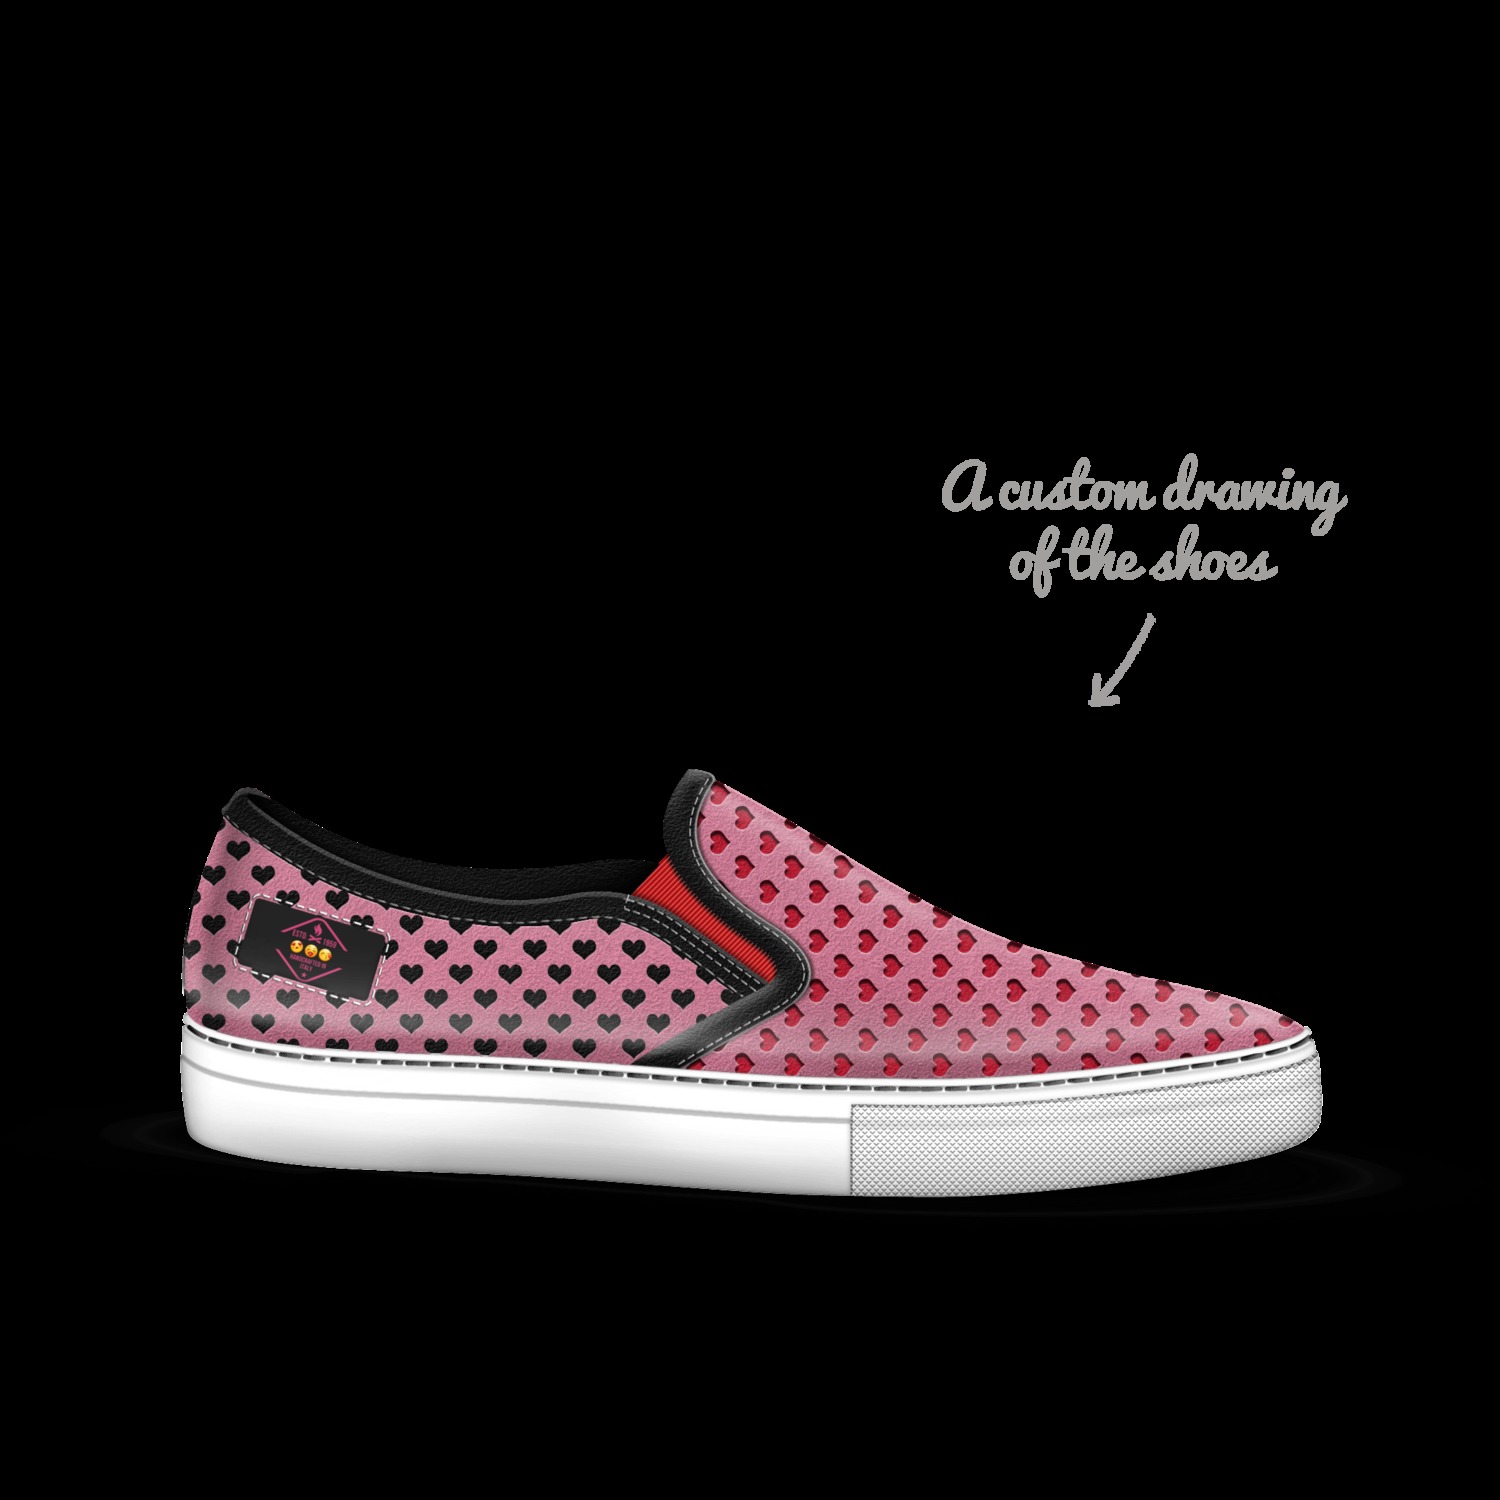 A Custom Shoe concept by Luther van Cropper